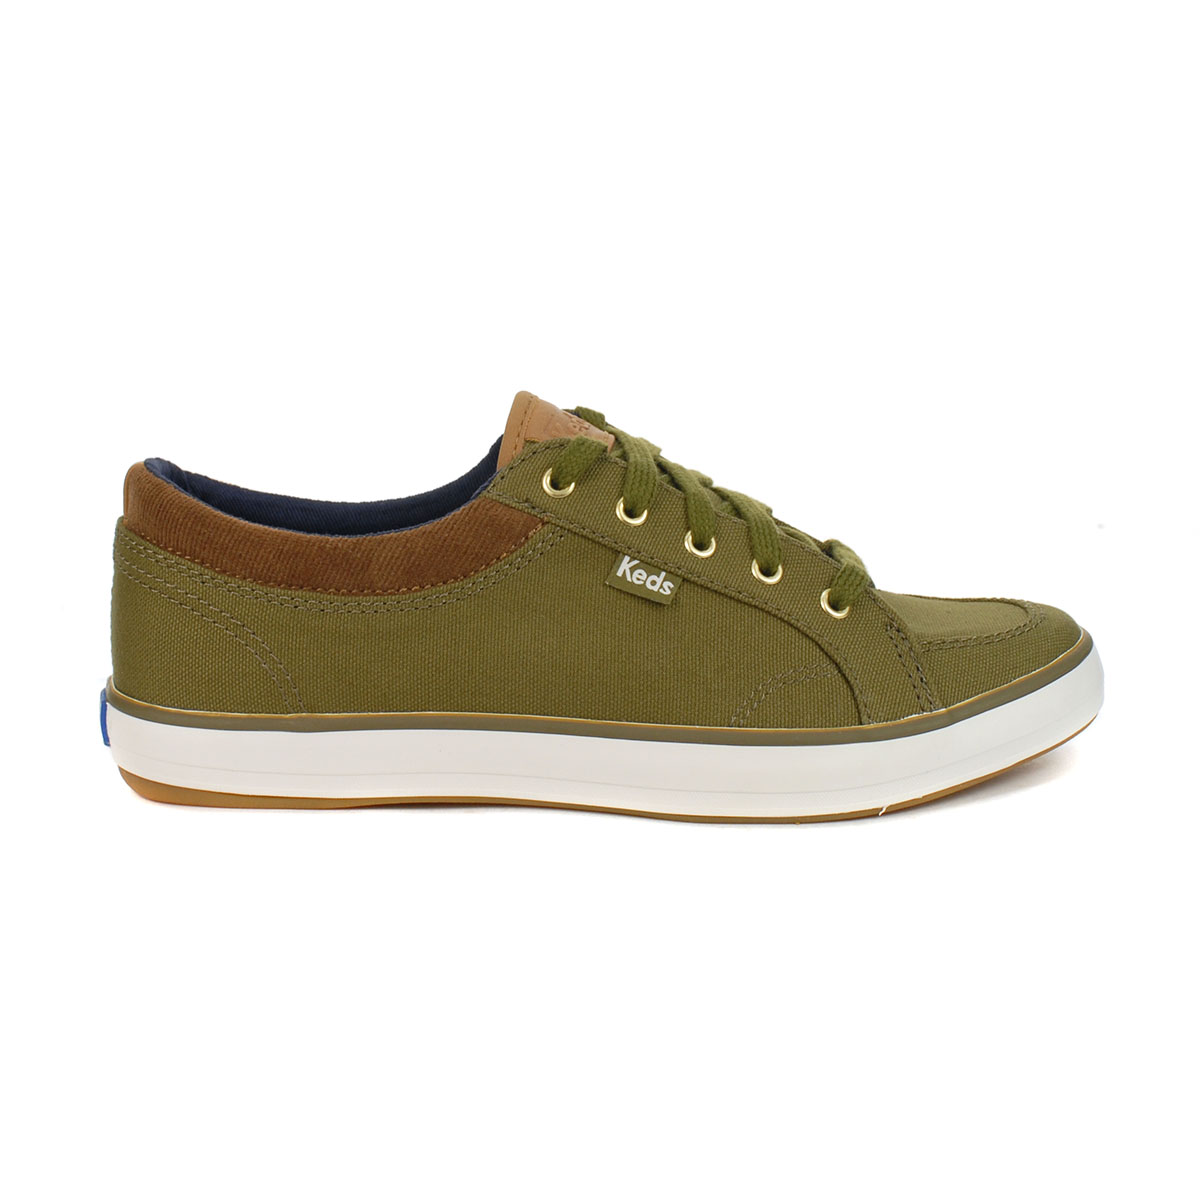 Keds Center Olive Waxed Canvas Sneakers WF63572 - WOOKI.COM